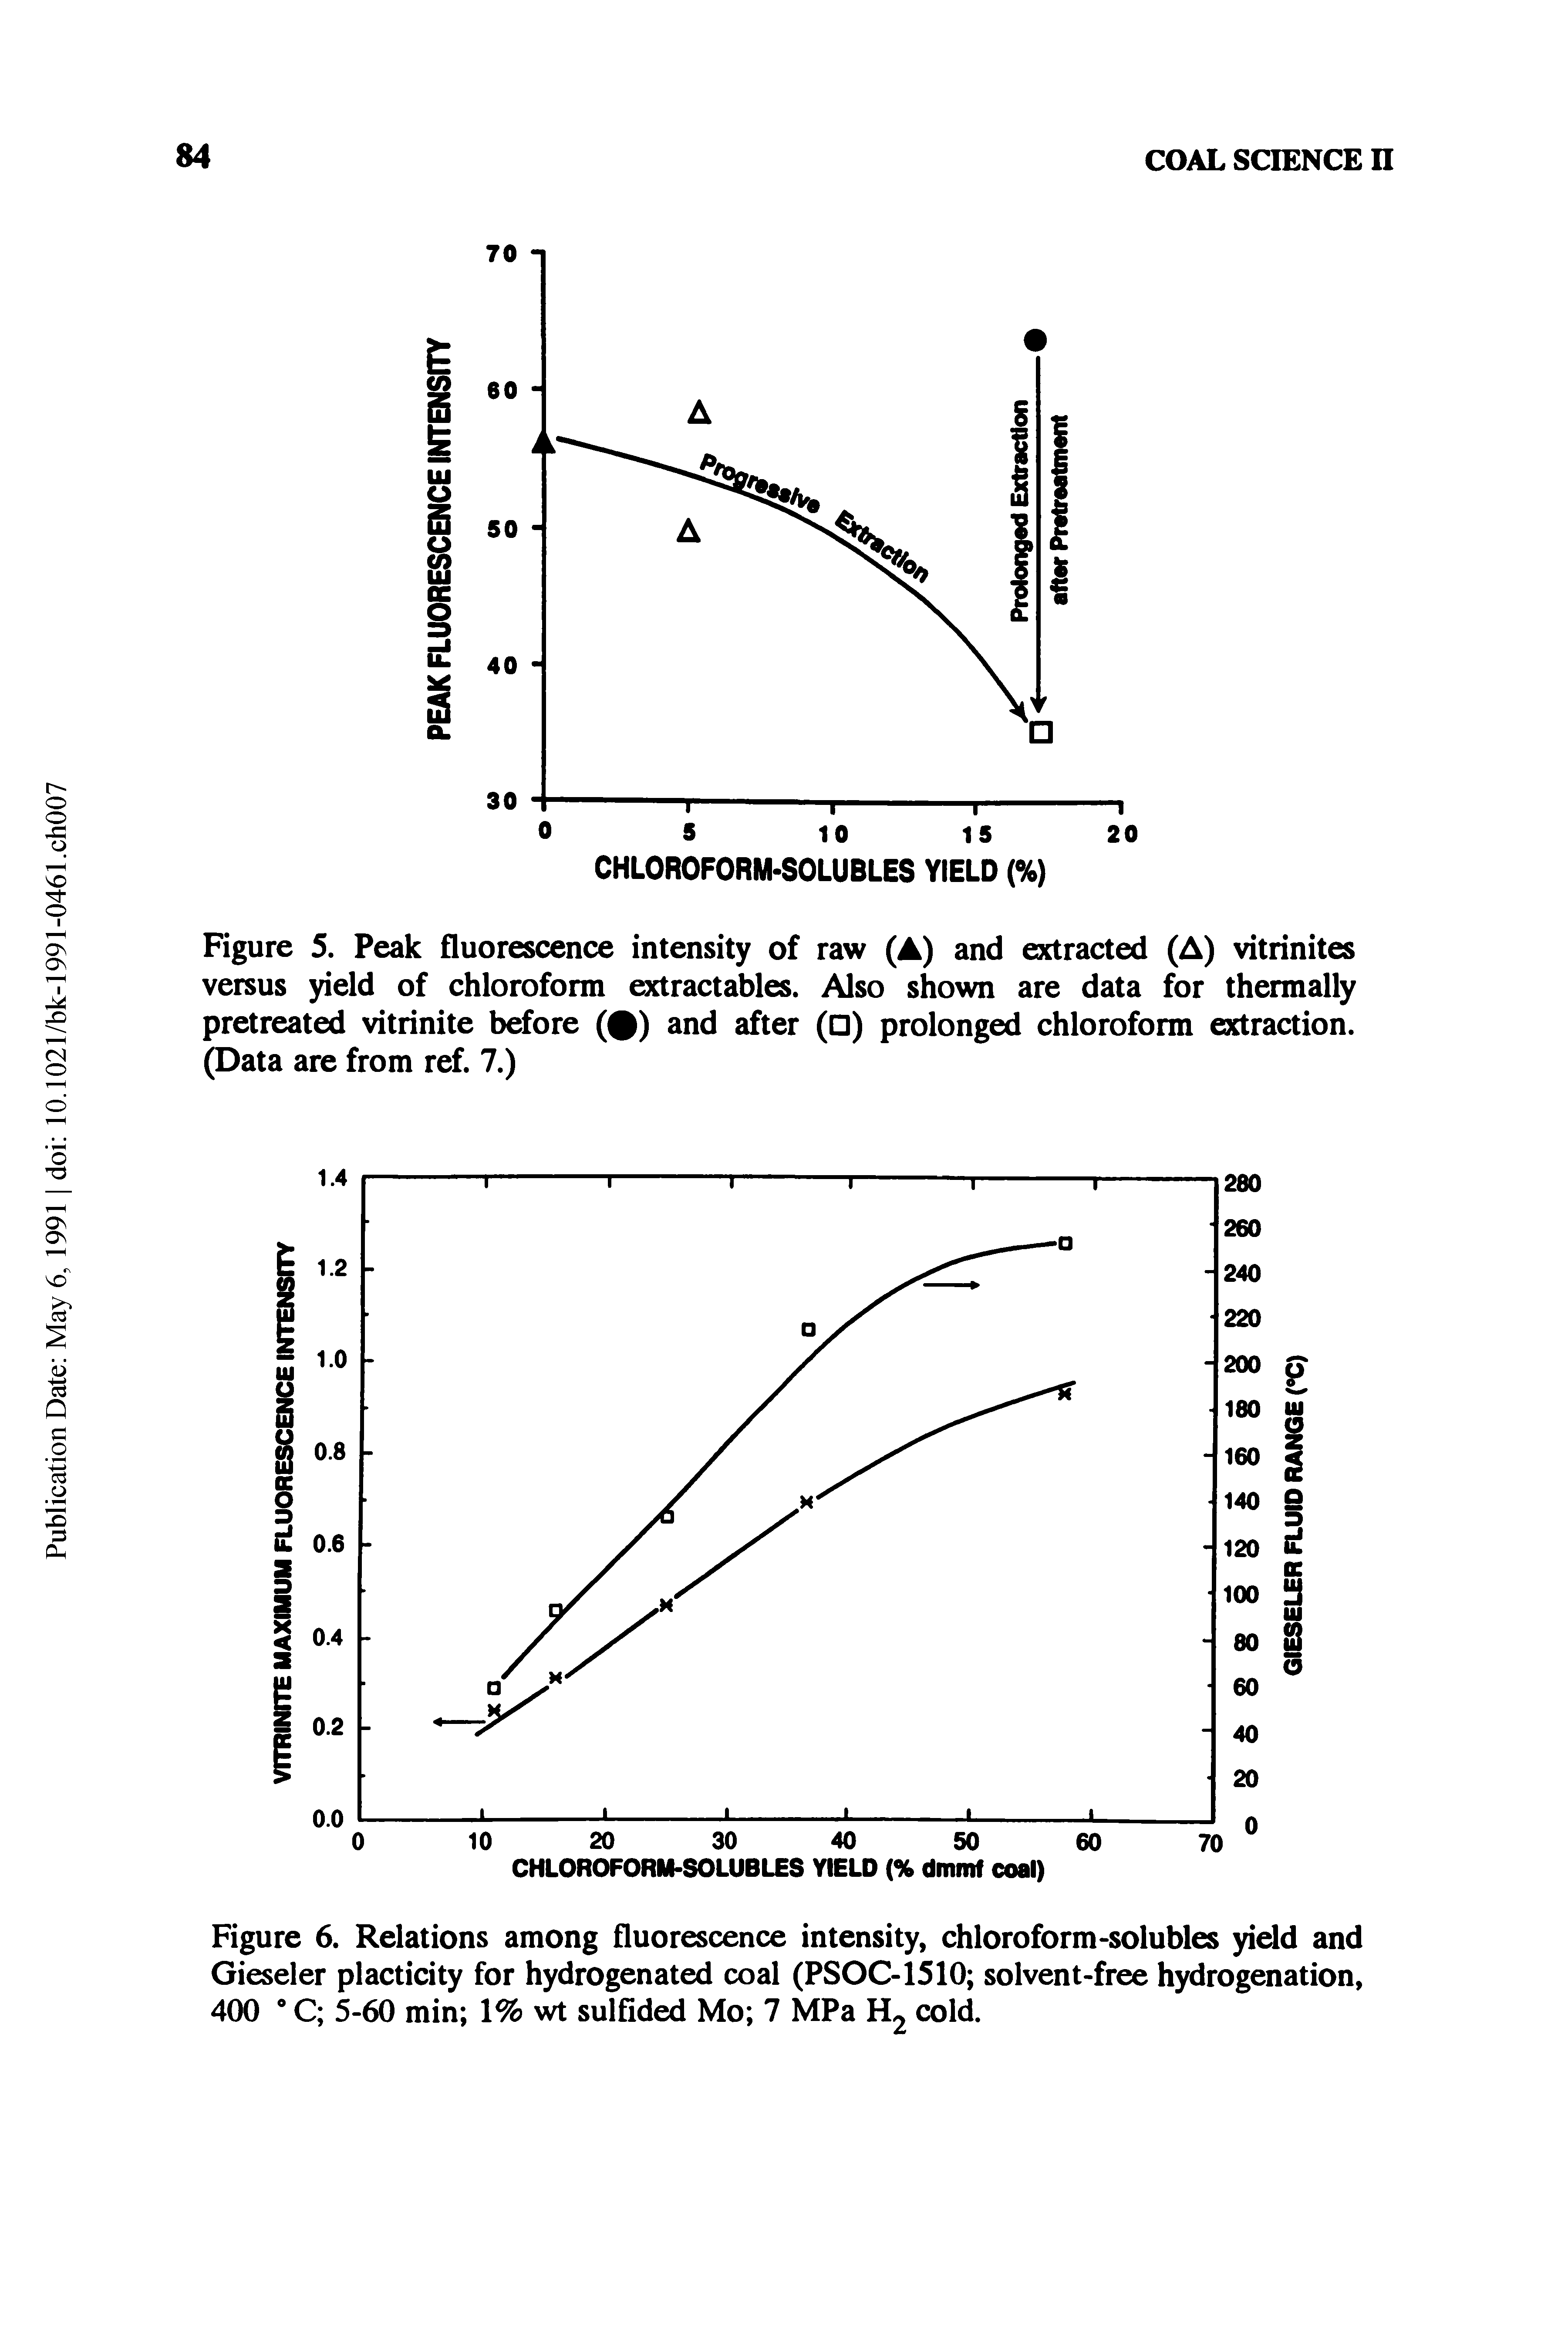 Figure 5. Peak fluorescence intensity of raw (A) and extracted (A) vitrinites versus yield of chloroform extractables. Also shown are data for thermally pretreated vitrinite before ( ) and after ( ) prolonged chloroform extraction. (Data are from ref. 7.)...